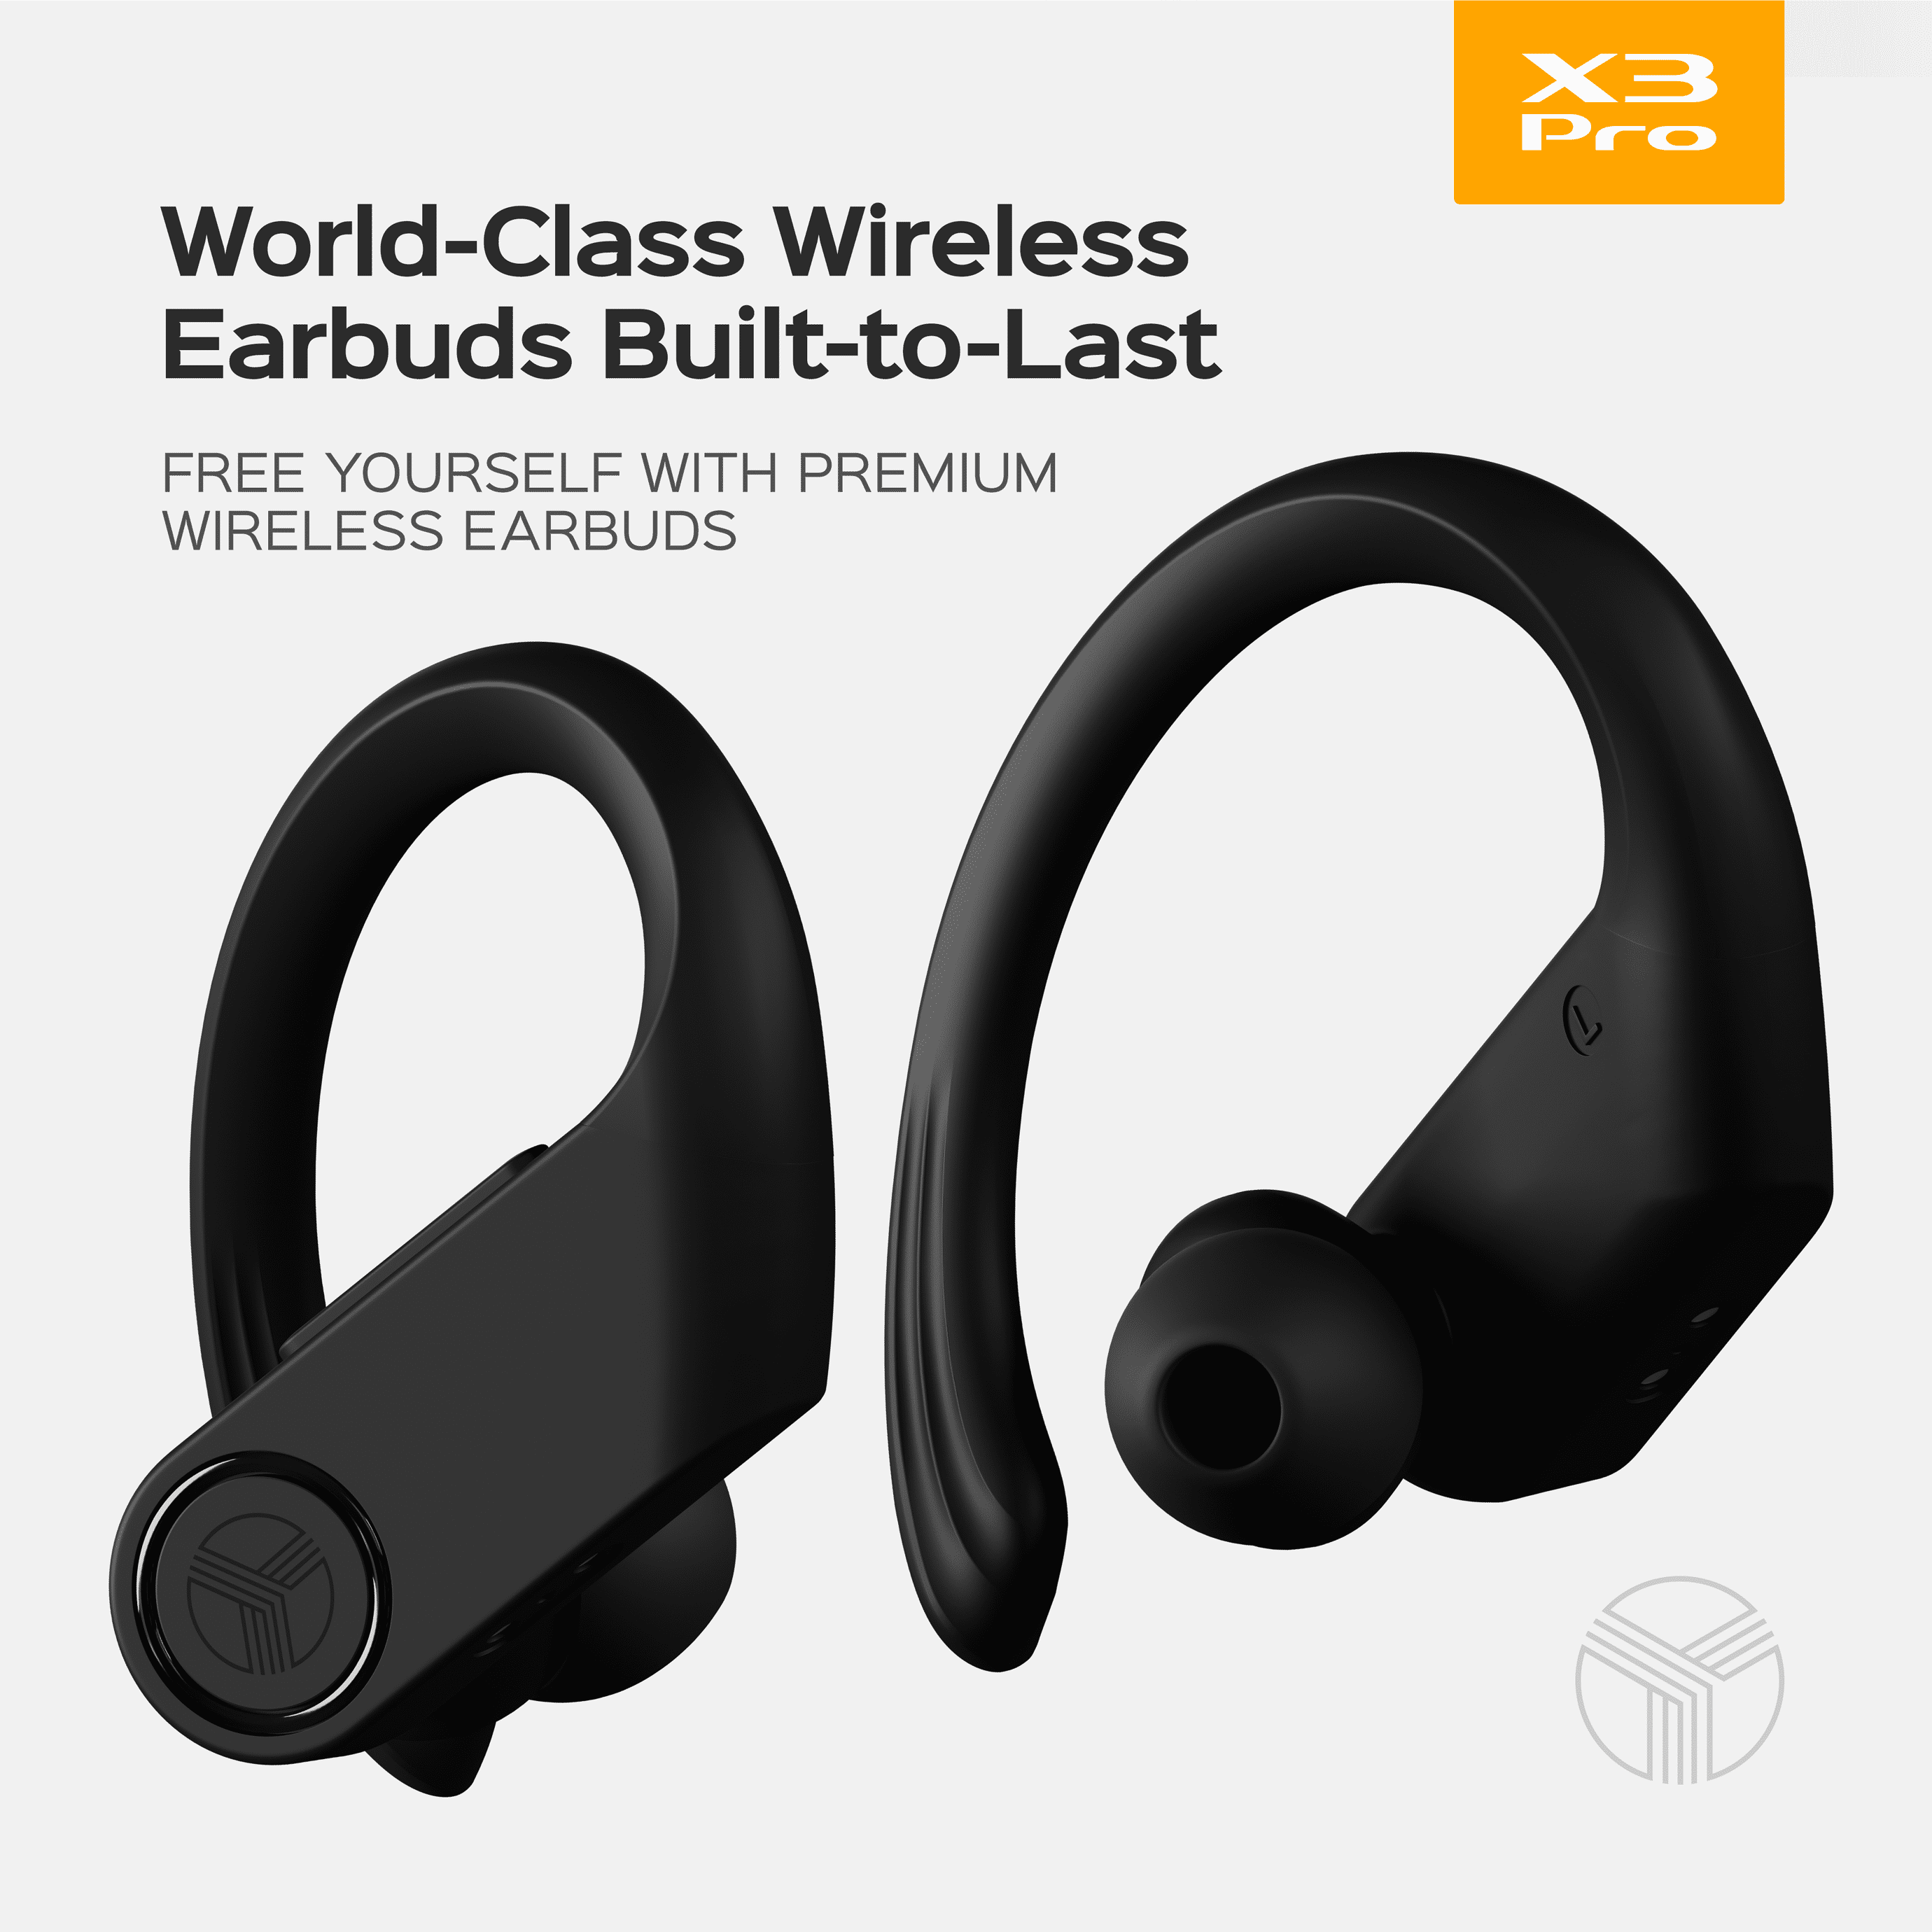 aptX Sport Bluetooth Headphones with Charging case Wireless Earbuds with Earhooks IPX7 Waterproof Earphones for Running & Workout Black 45H Playtime TREBLAB X3-Pro Built-in Microphone 